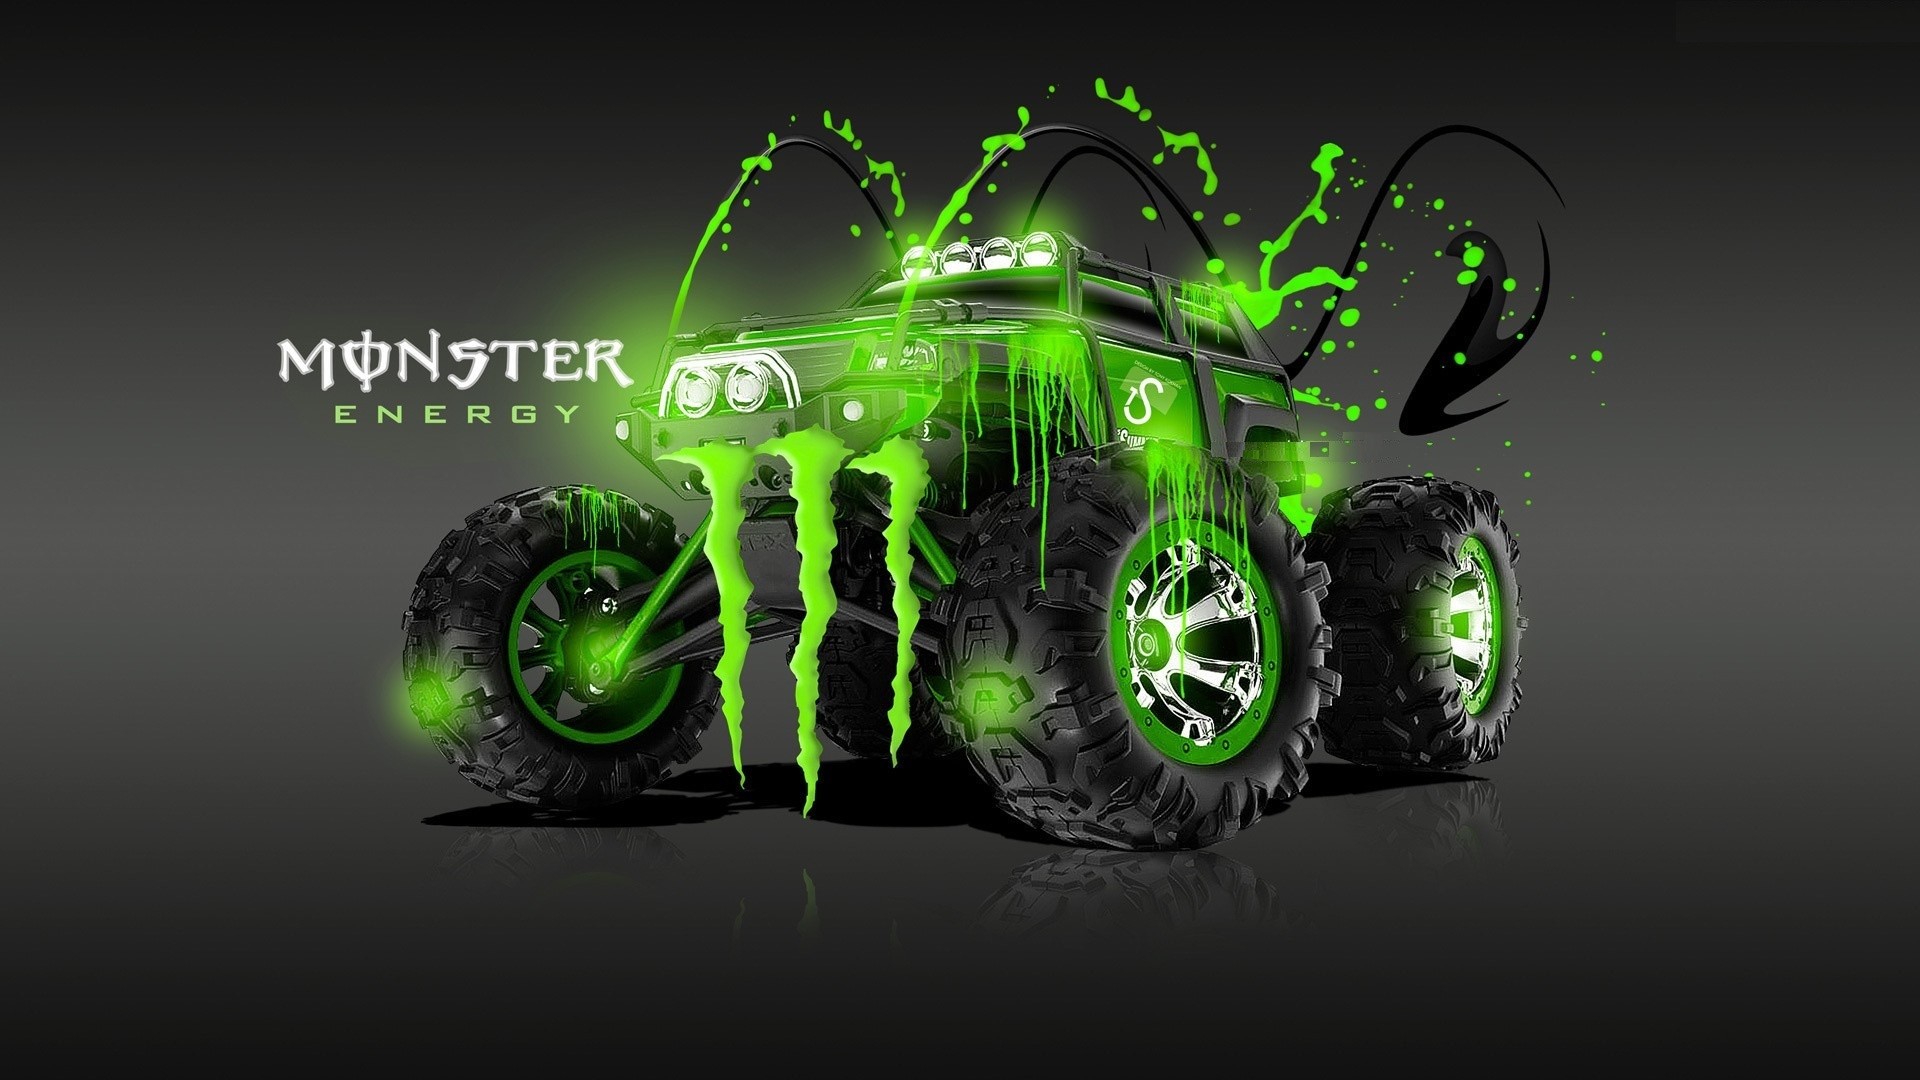 1920x1080 monster energy wallpaper onwuo hd high definition windows 10 mac apple  colourful images backgrounds download wallpaper free 1920Ã1080 Wallpaper HD